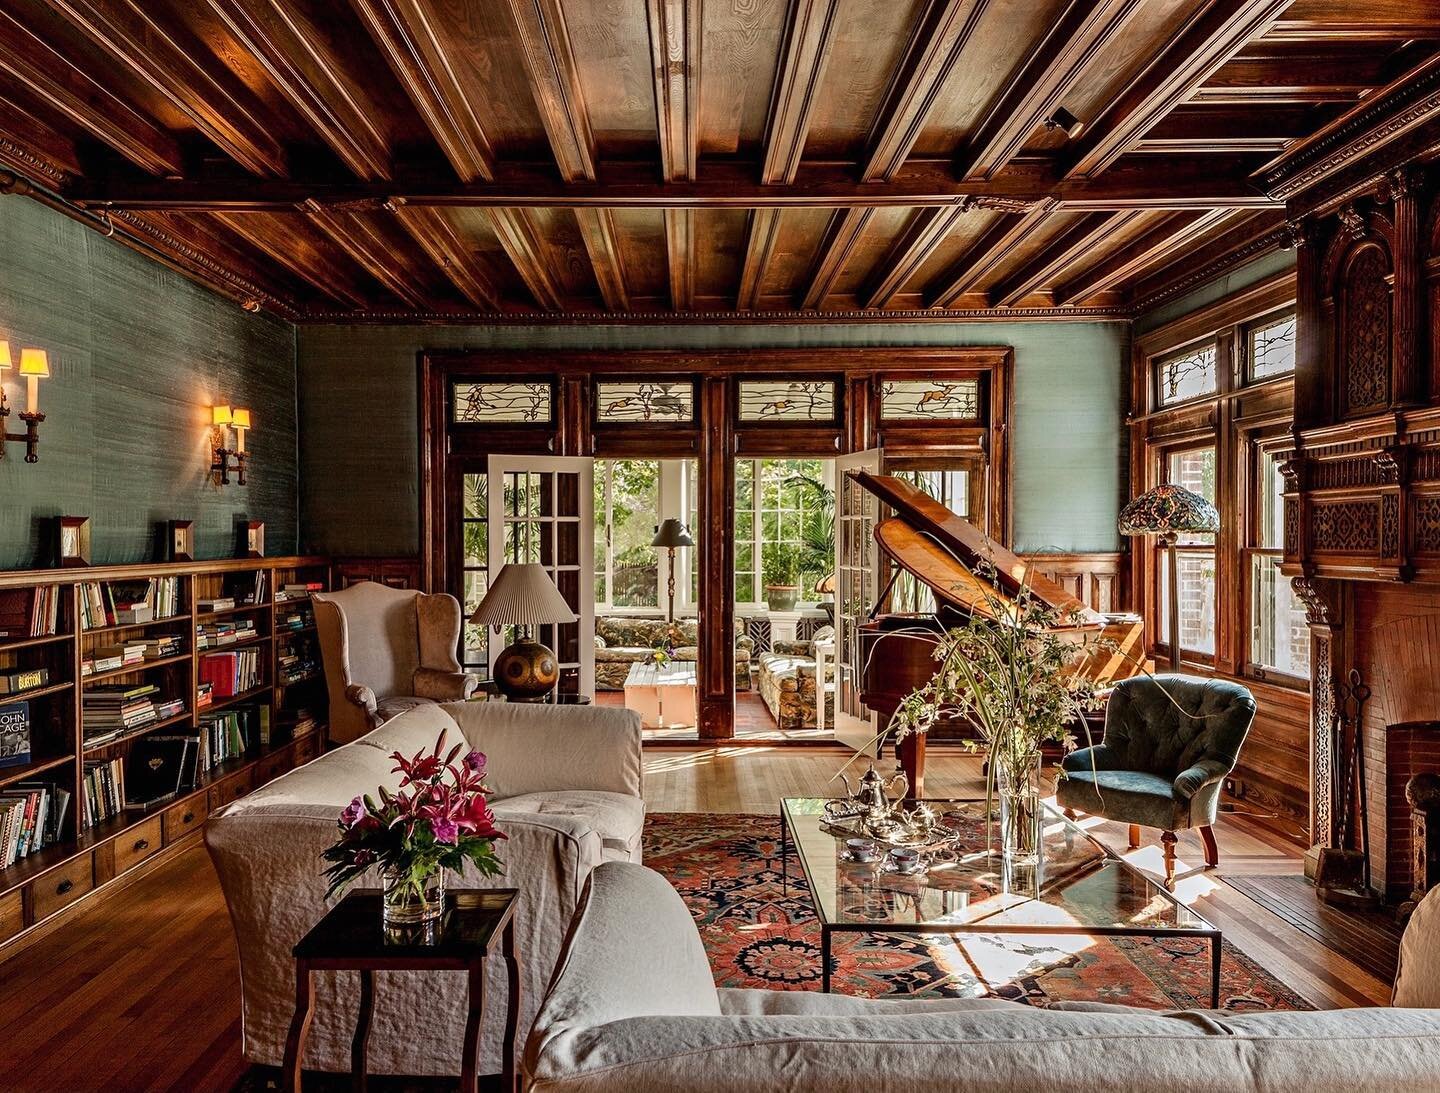 This week's #PropertyOfTheWeek is an absolute gem in Hudson's Historic District ✨⁠⁠
.⁠⁠
The Tiger House was designed and built by architect Marcus Reynolds at the turn of the 20th century as a hunting lodge for the heir to an early cosmetics fortune 